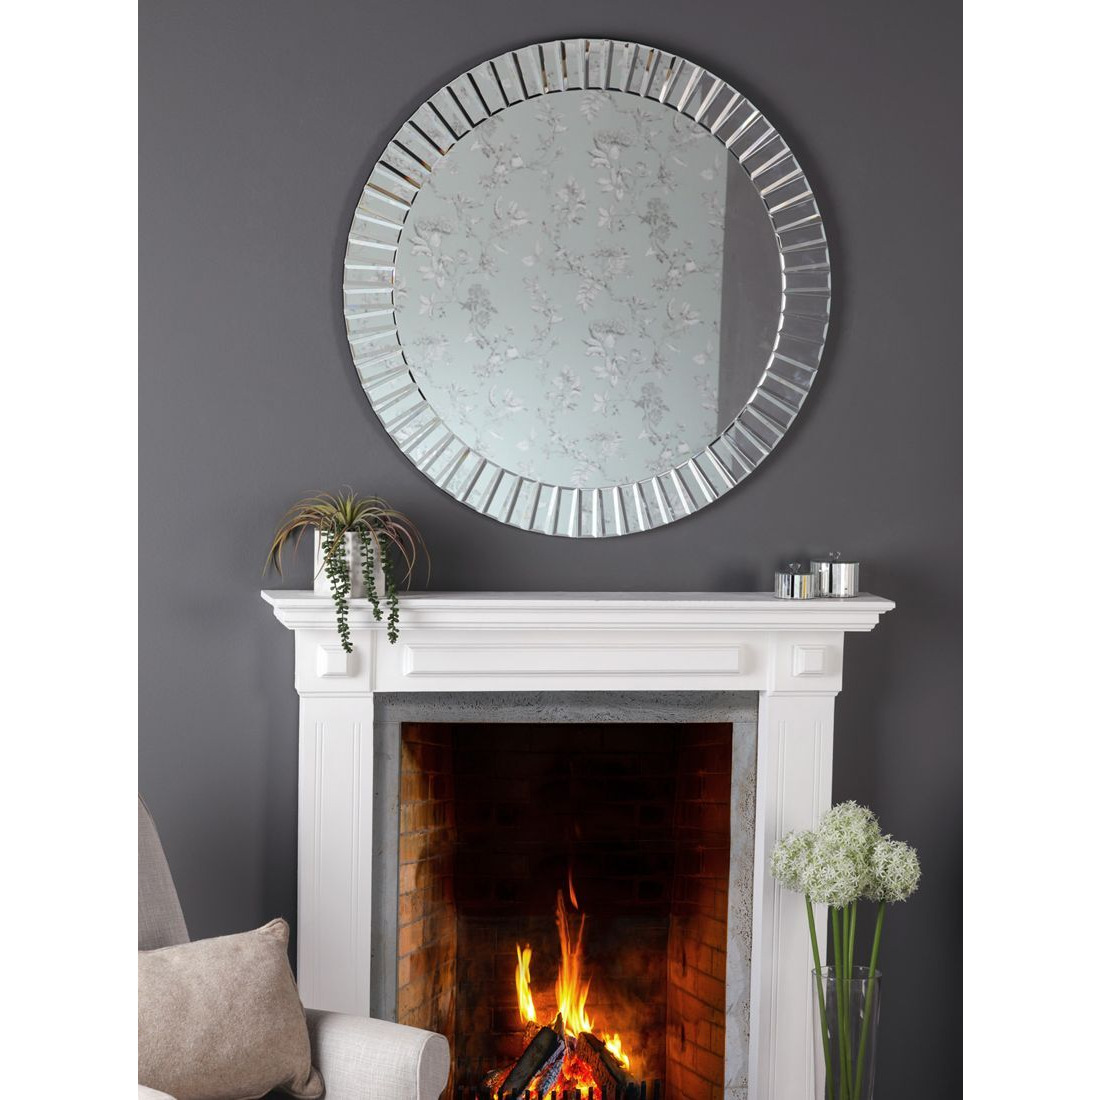 Laura Ashley Capri Bevelled Glass Round Wall Mirror, Clear - image 1